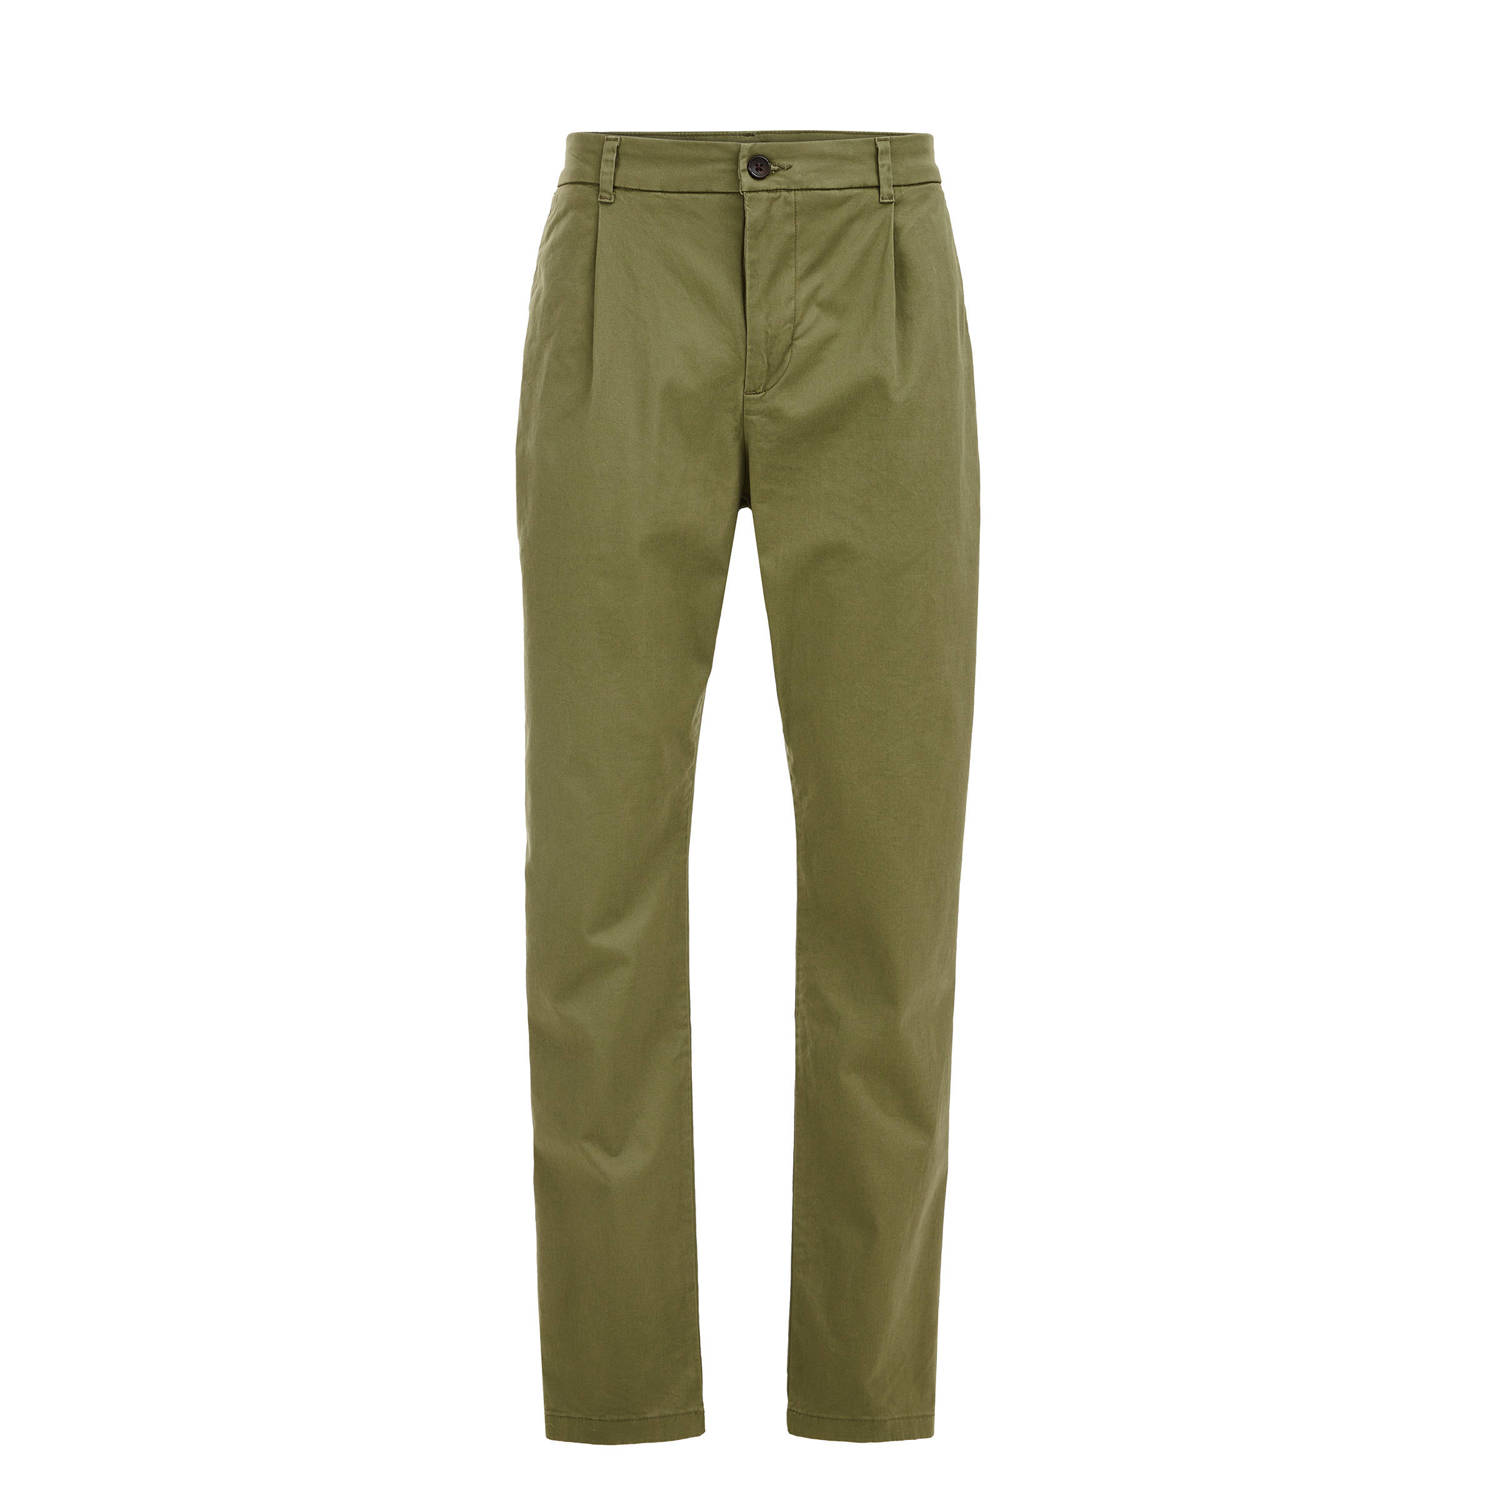 WE Fashion tapered fit chino Ben olive